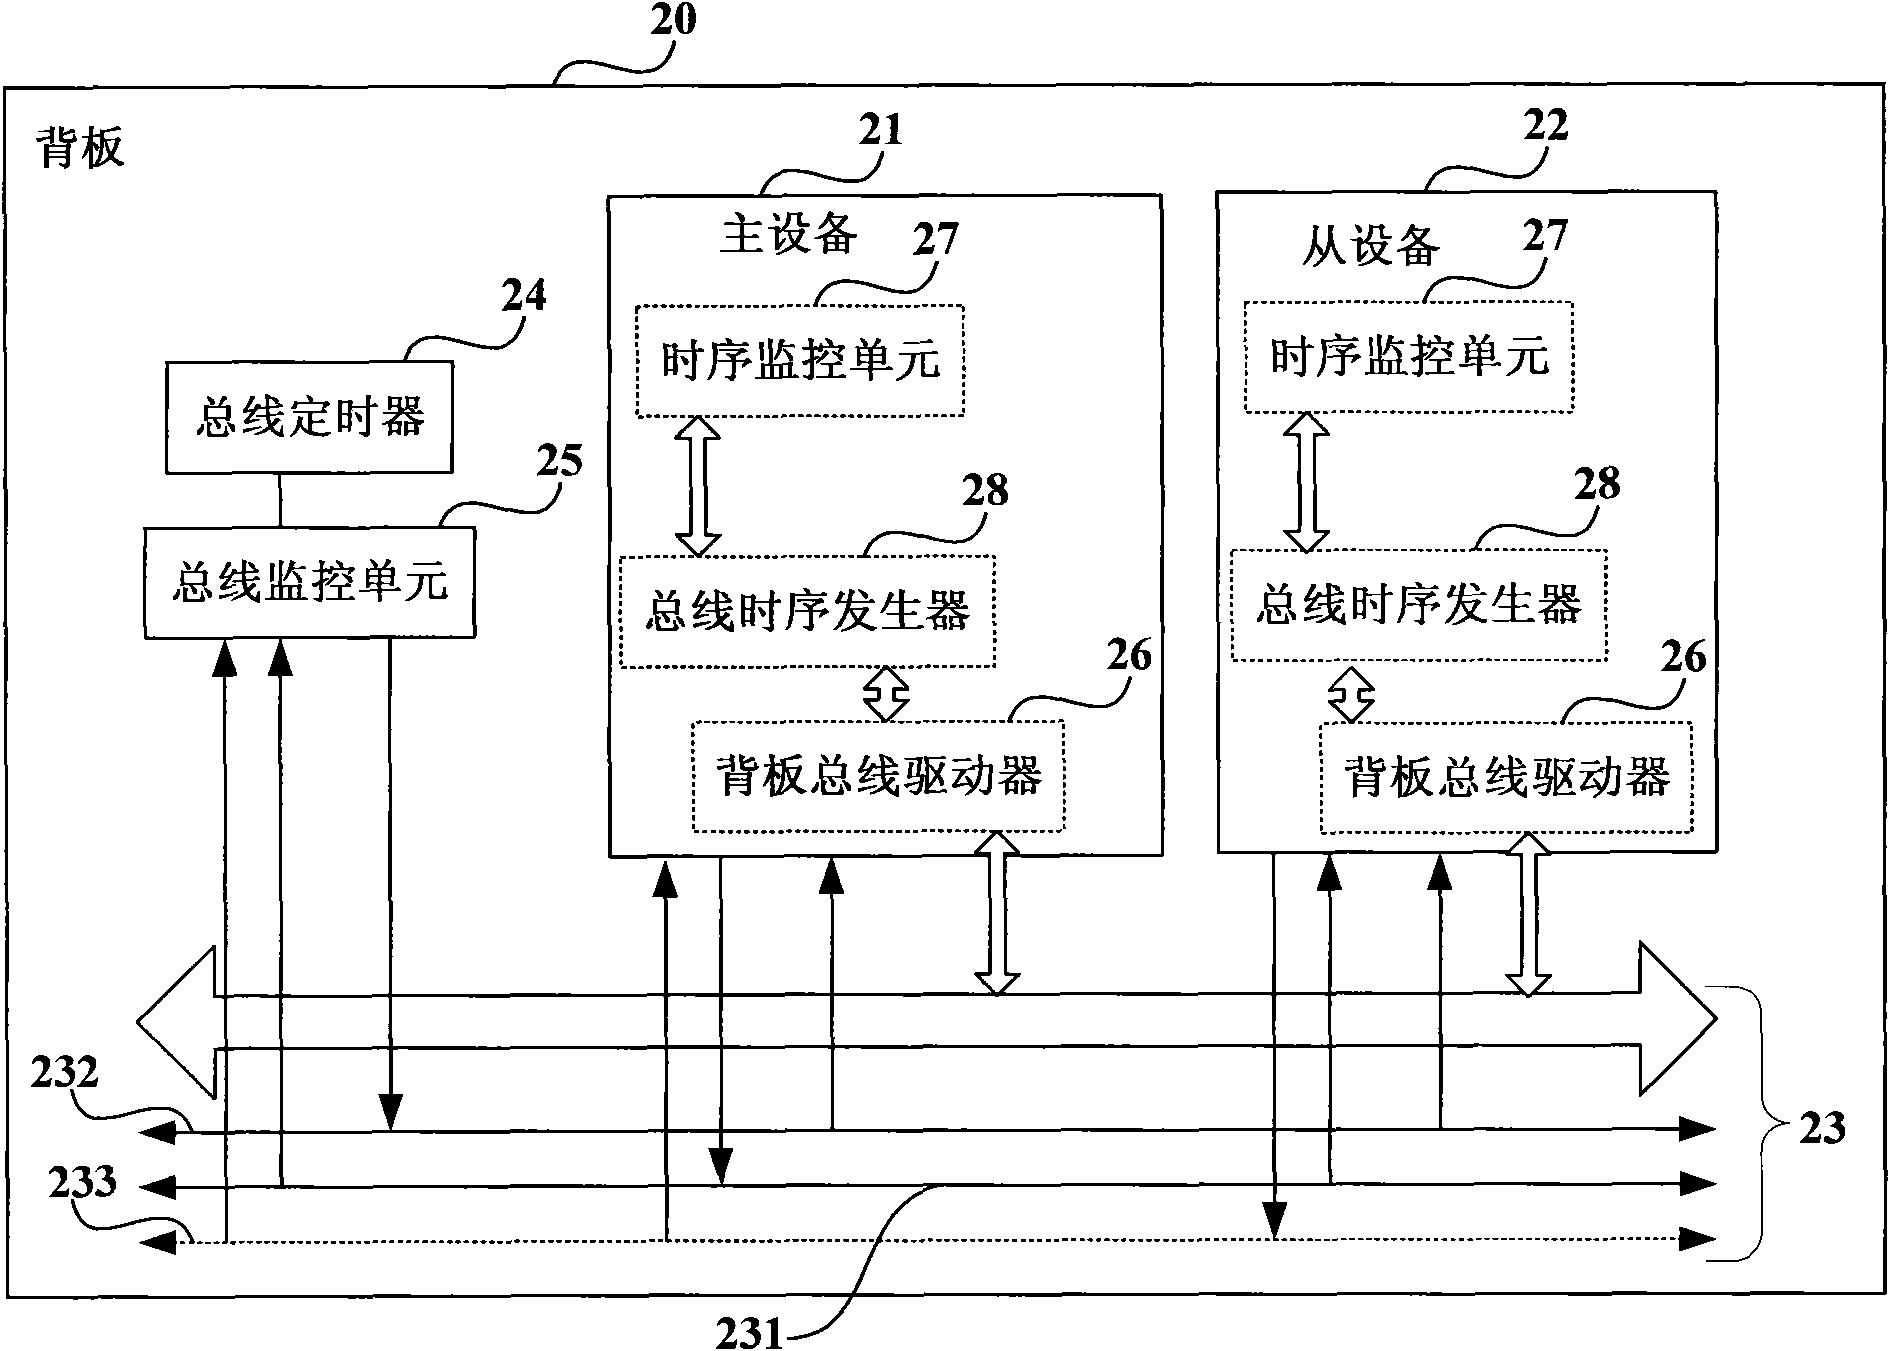 Computer system and method for monitoring bus of same